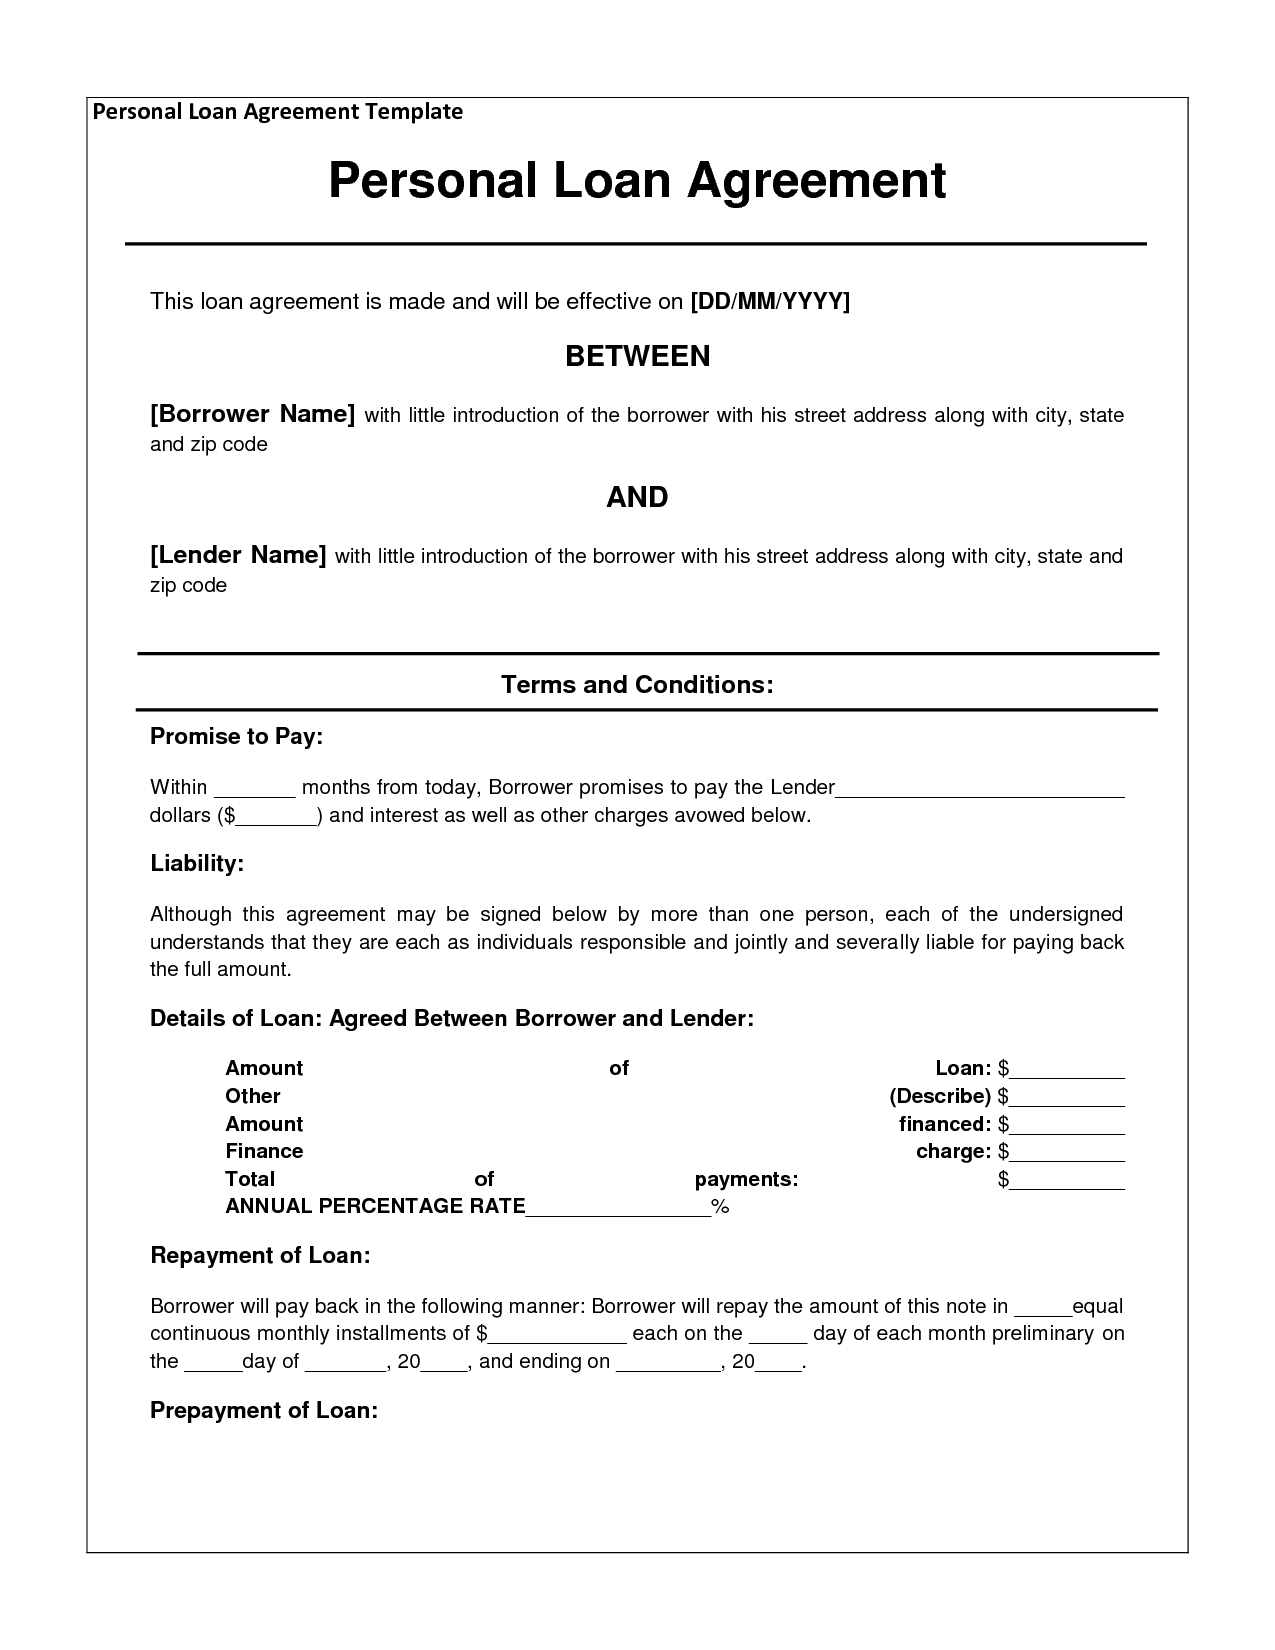 Free Personal Loan Agreement Form Template - $1000 Approved In 2 - Free Printable Legal Documents Forms